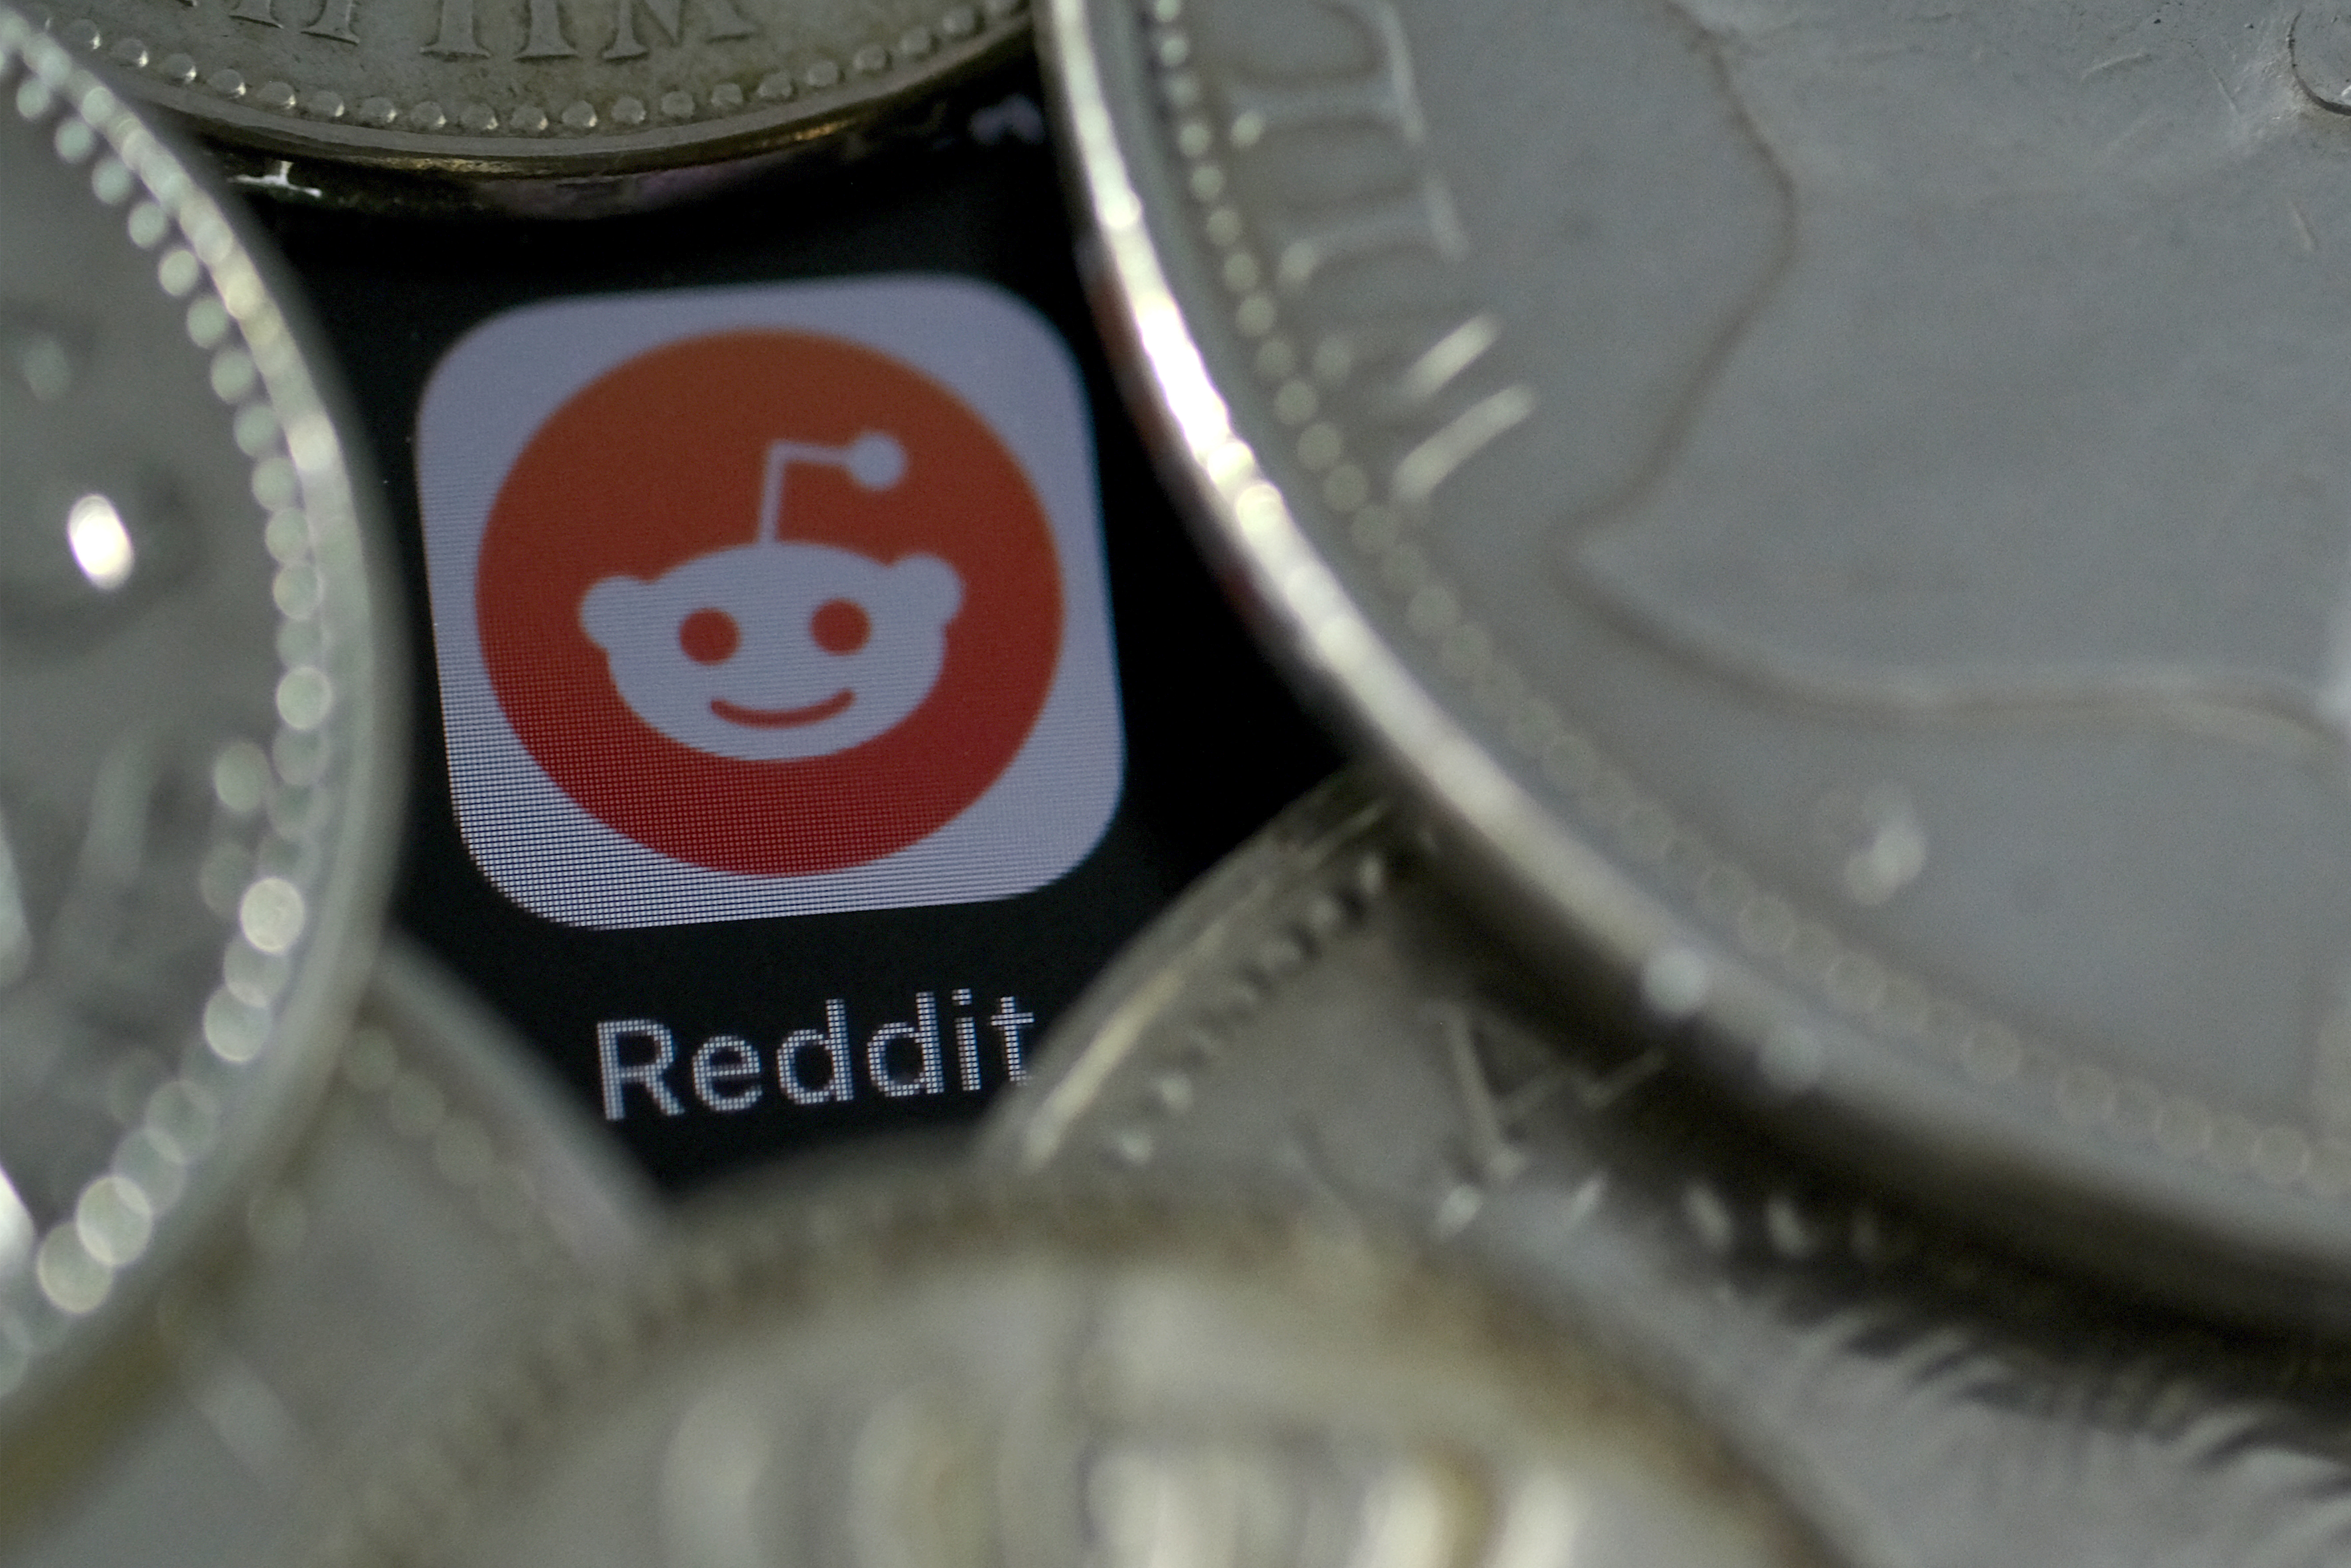 A Reddit icon surrounded by coins.